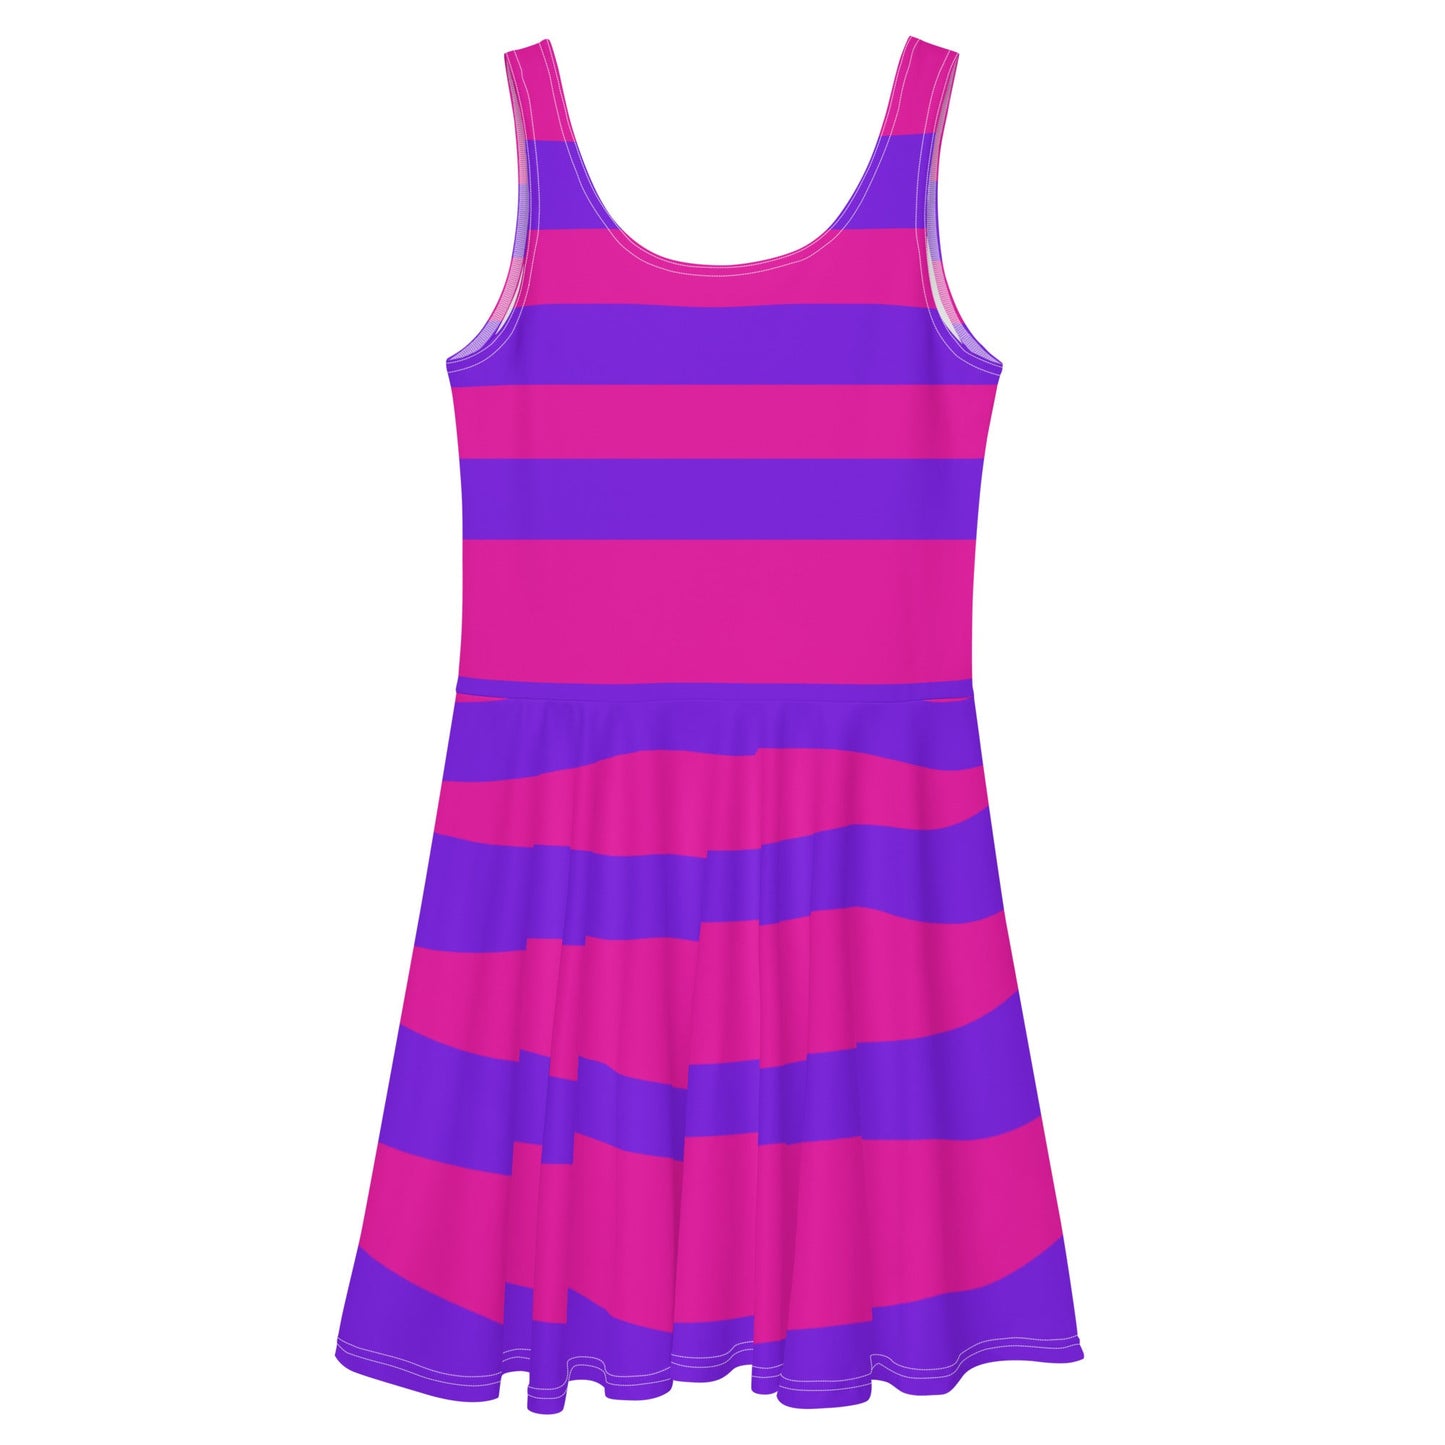 Cheshire Cat Skater Dress alice costumeCheshire catcosplay#tag4##tag5##tag6#